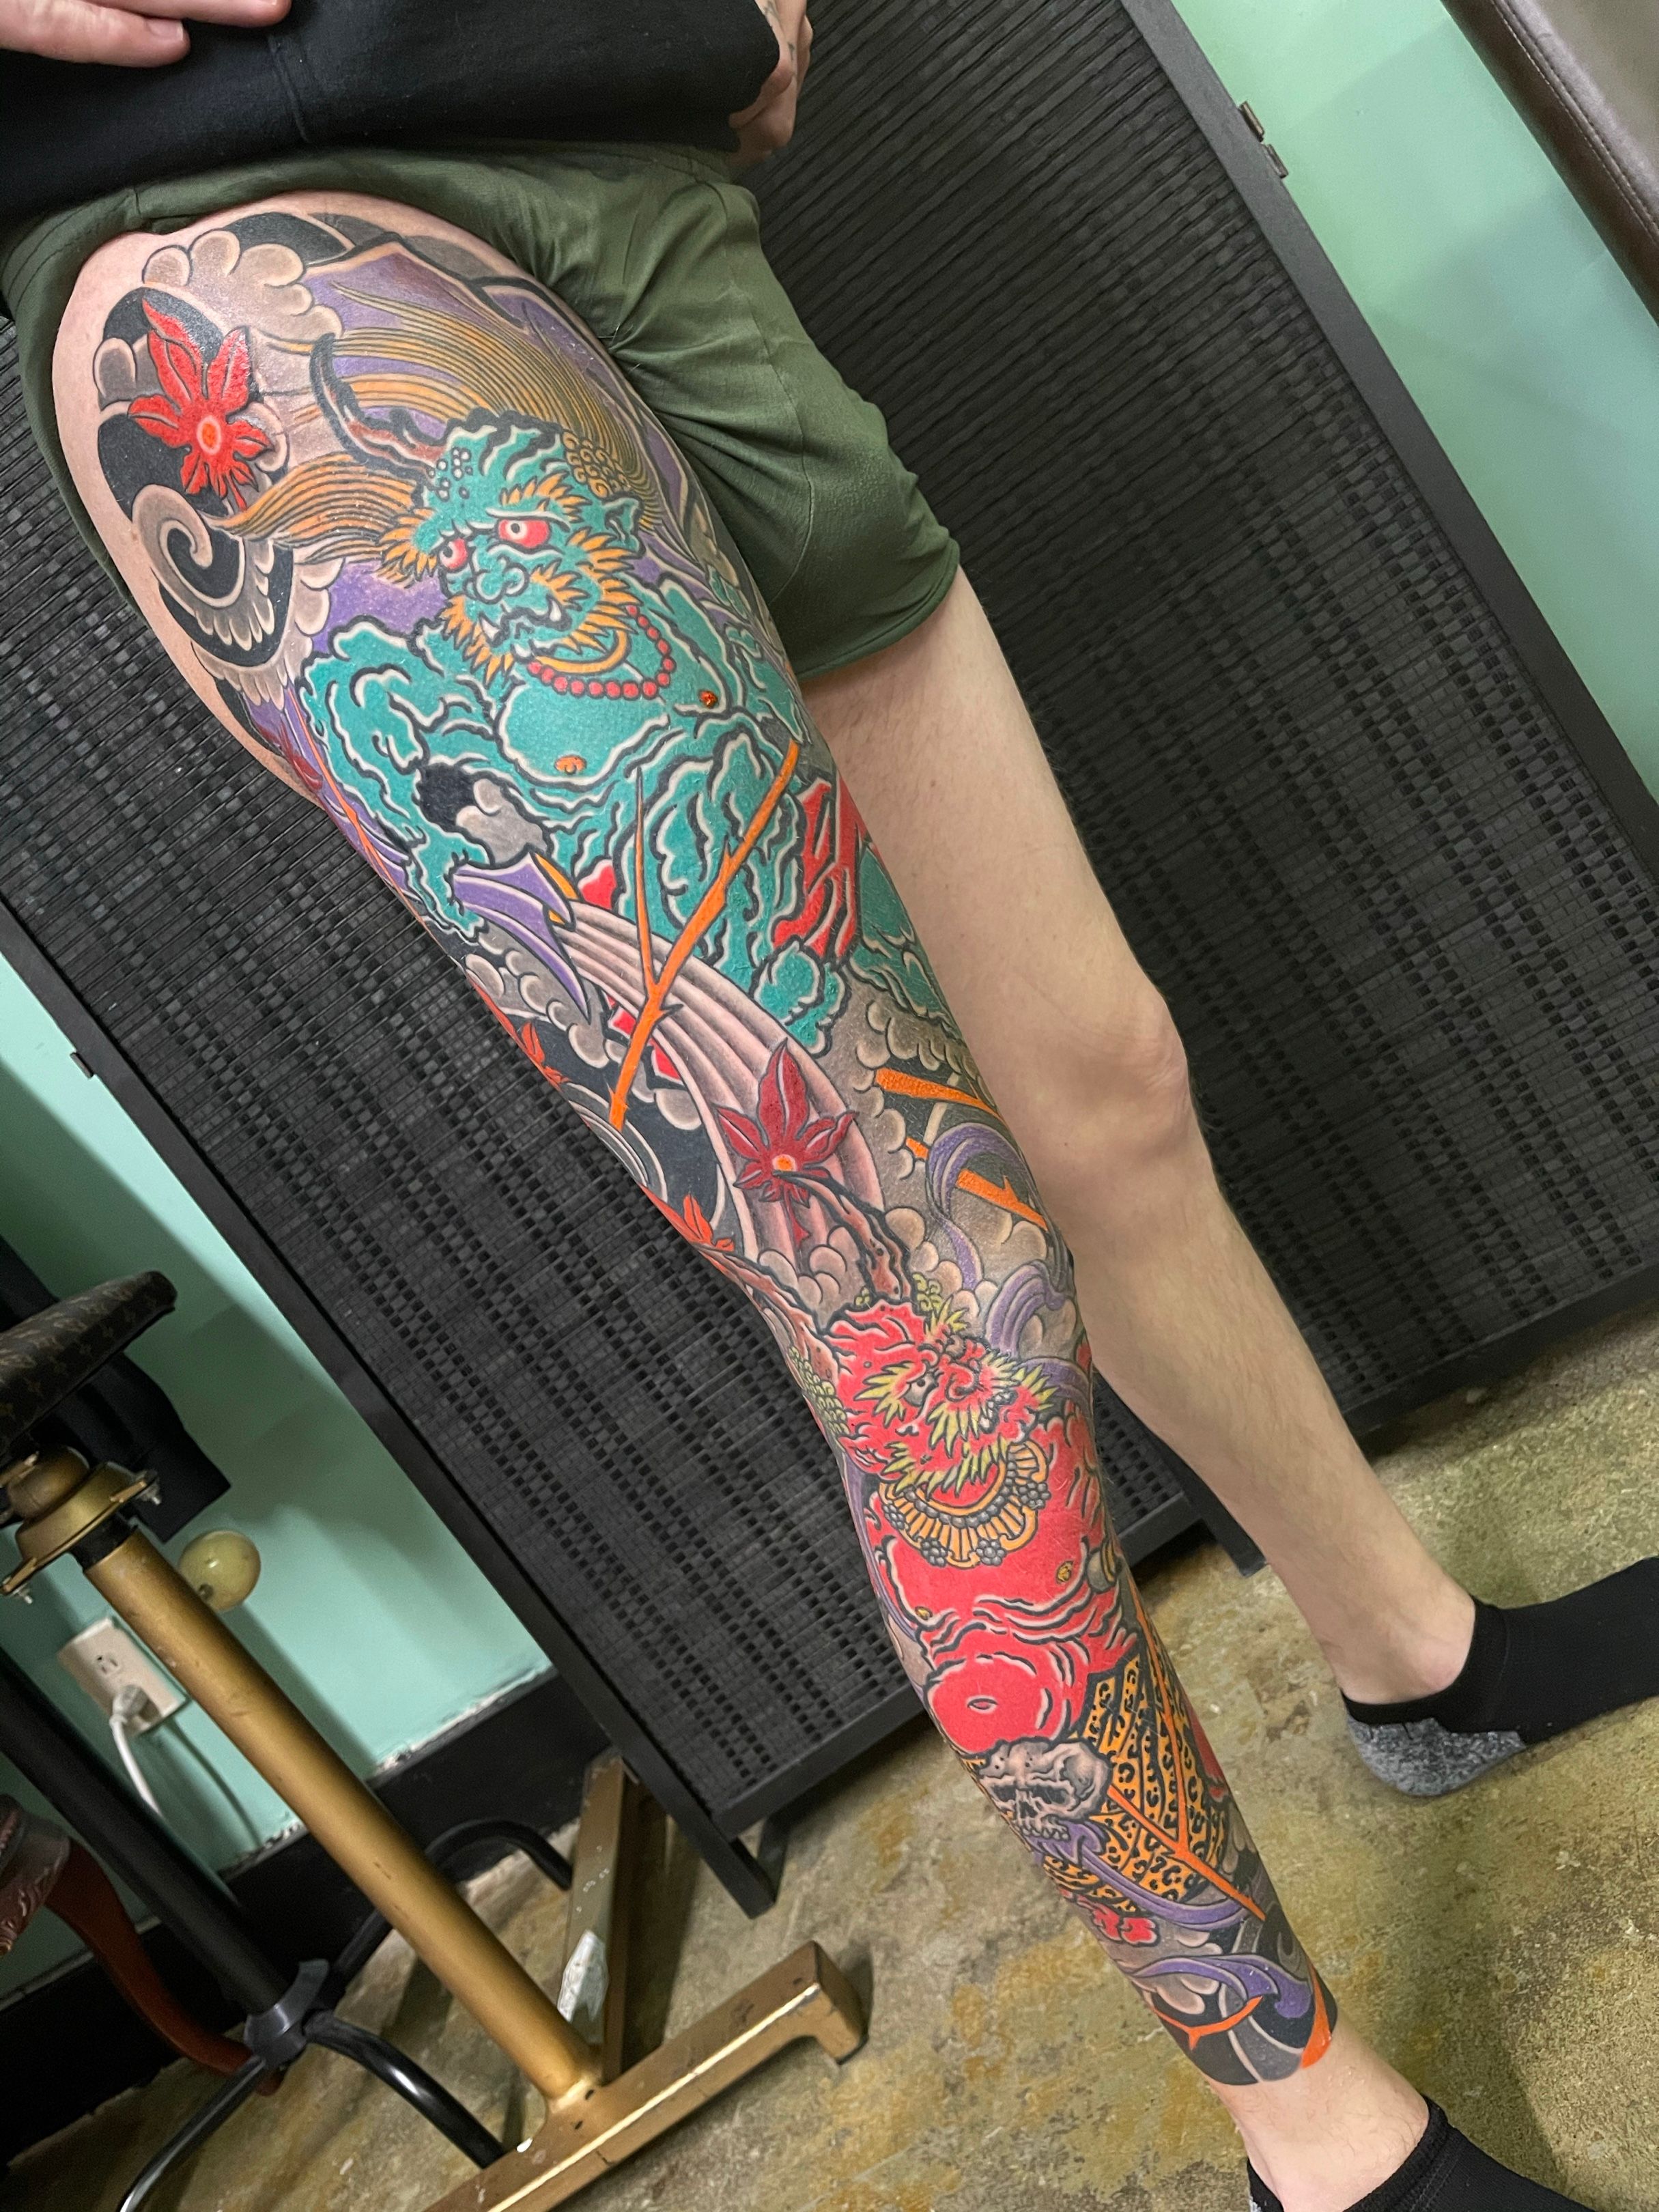 Completed leg sleeve by Chris rogers. (@old_man_rogers- white dog